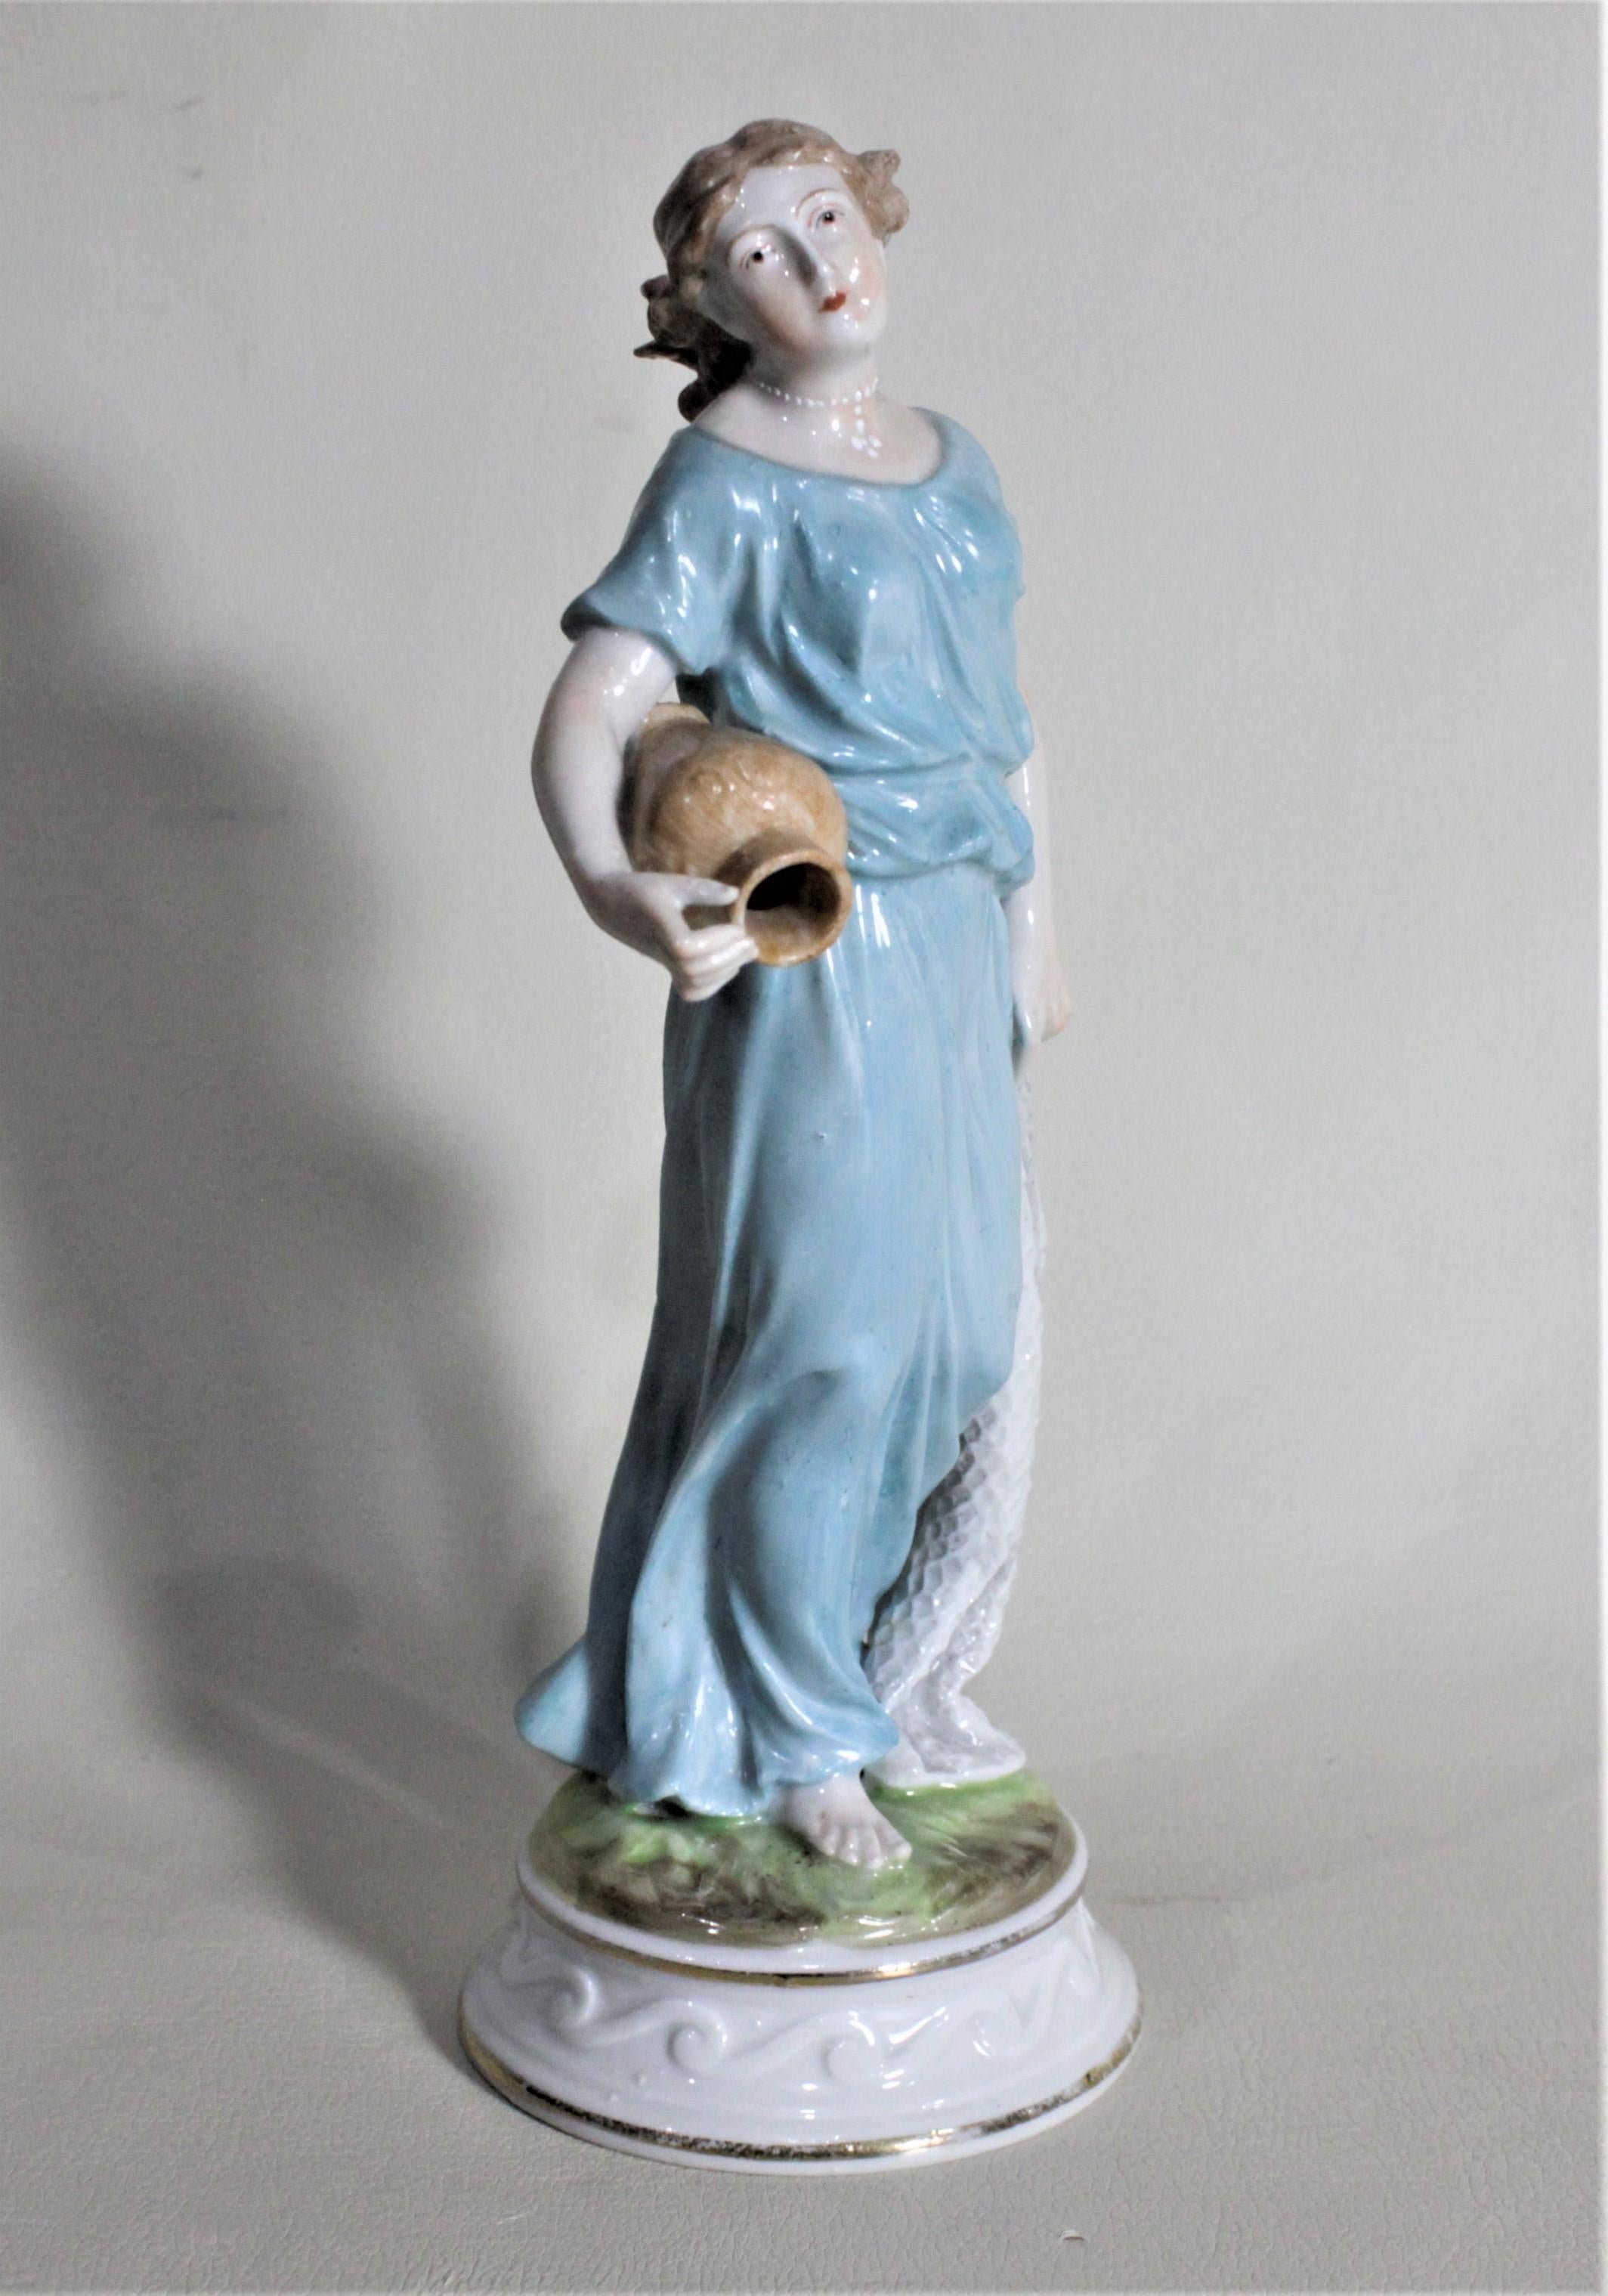 This well executed porcelain figurine was made by the Meissen factory of Germany in circa 1900. This figurine depicts a woman in a long flowing blue dress carrying a terracotta water pot. The piece is clearly marked with the cobalt blue crossed